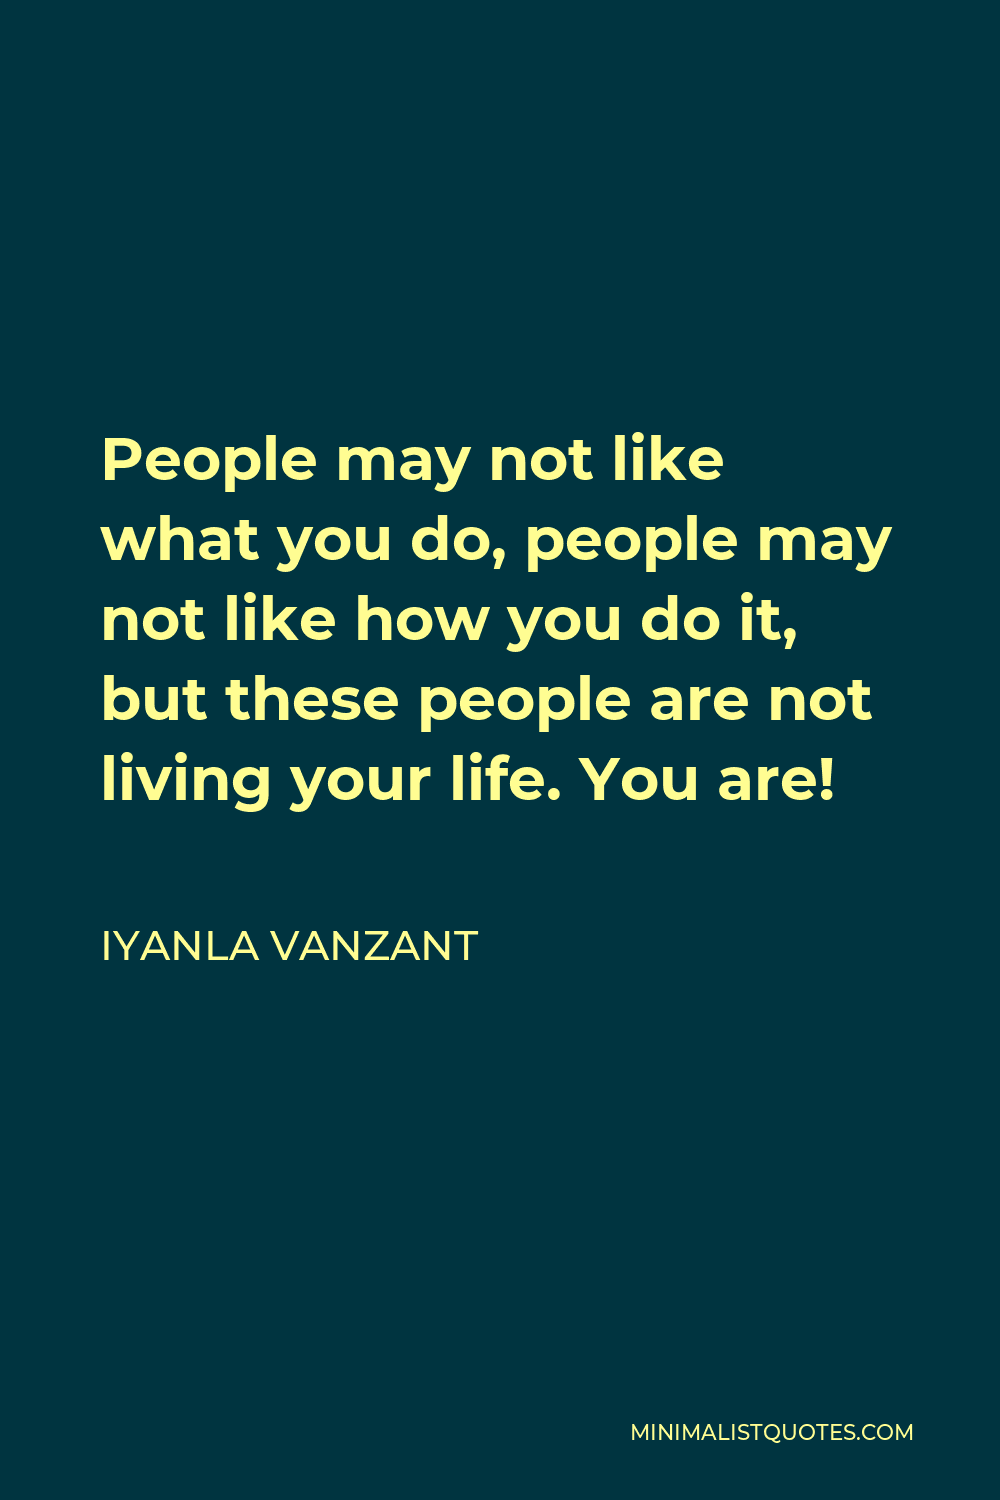 Iyanla Vanzant Quote - People may not like what you do, people may not like how you do it, but these people are not living your life. You are!